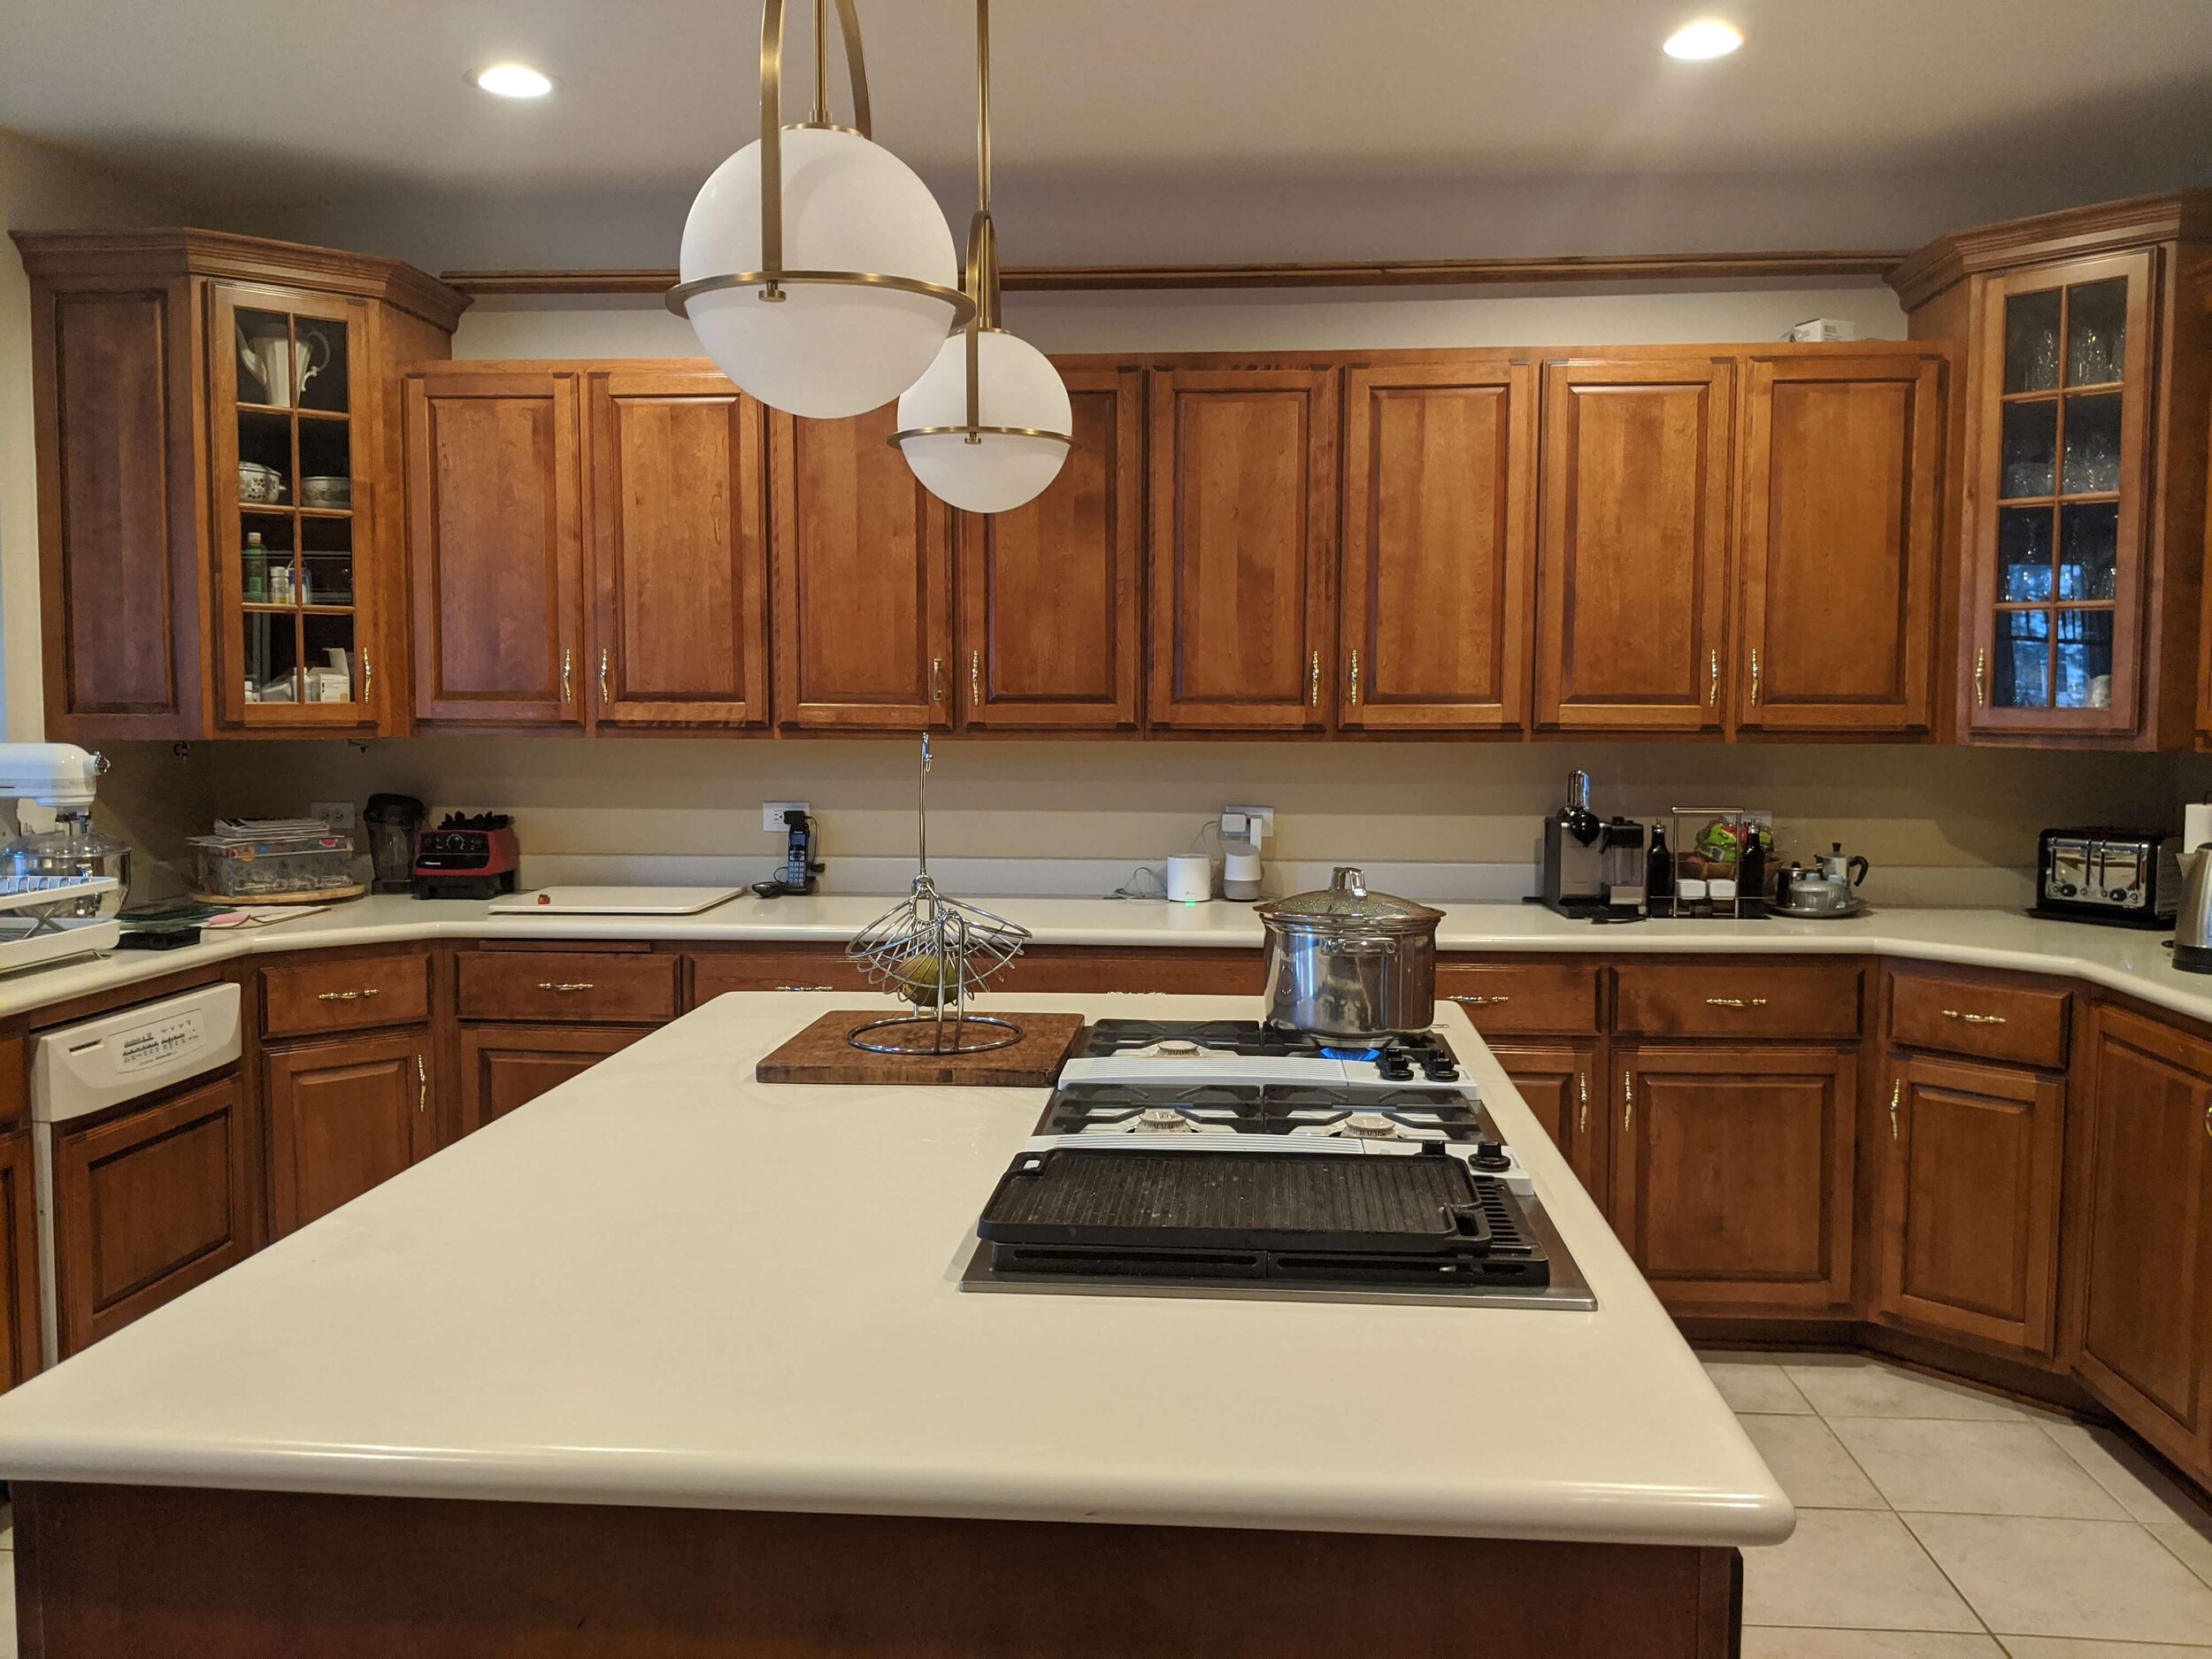 Update A Kitchen With Wood Cabinets, What Color Tile Goes With Light Oak Cabinets